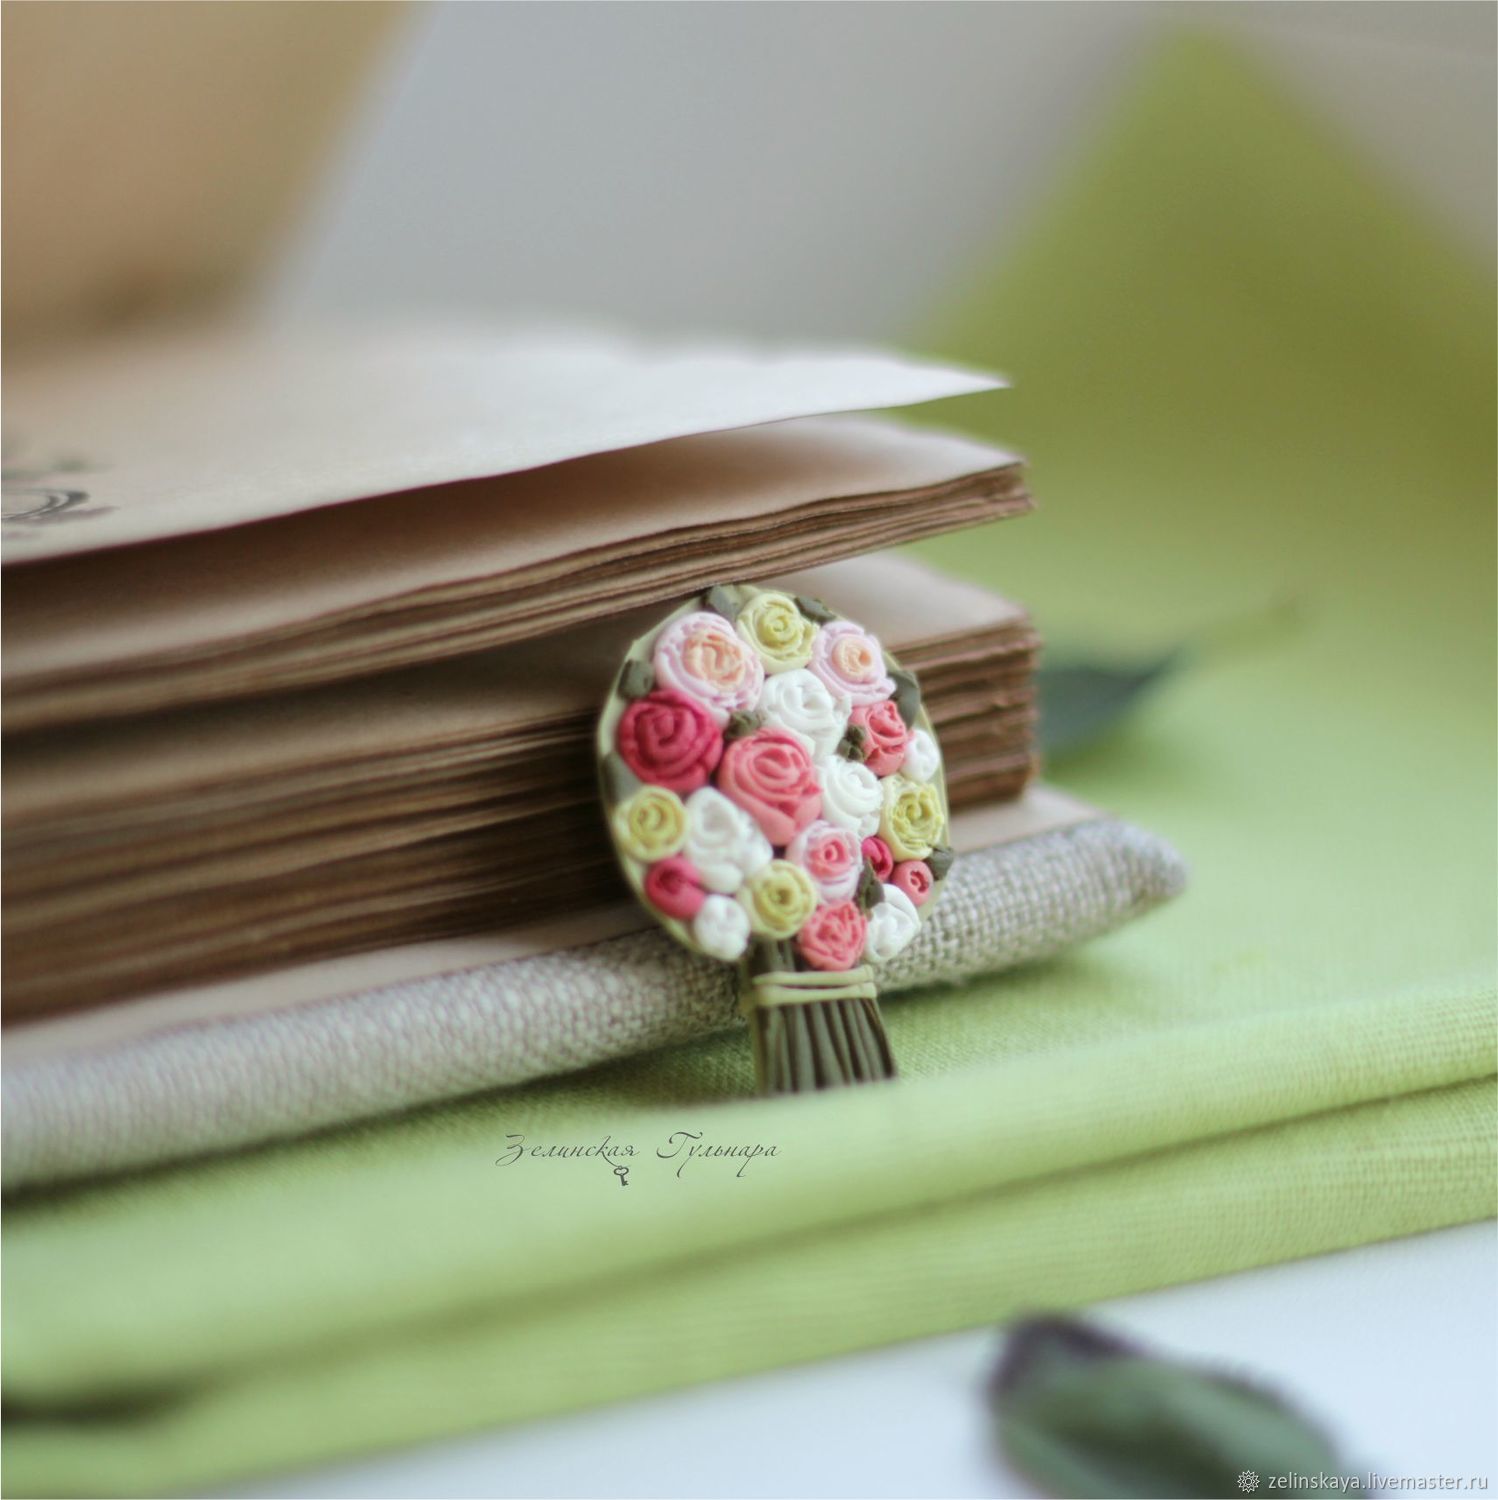 Polymer clay miniature bouquet brooch - Miniature Bouquet with Roses and Ranunculus